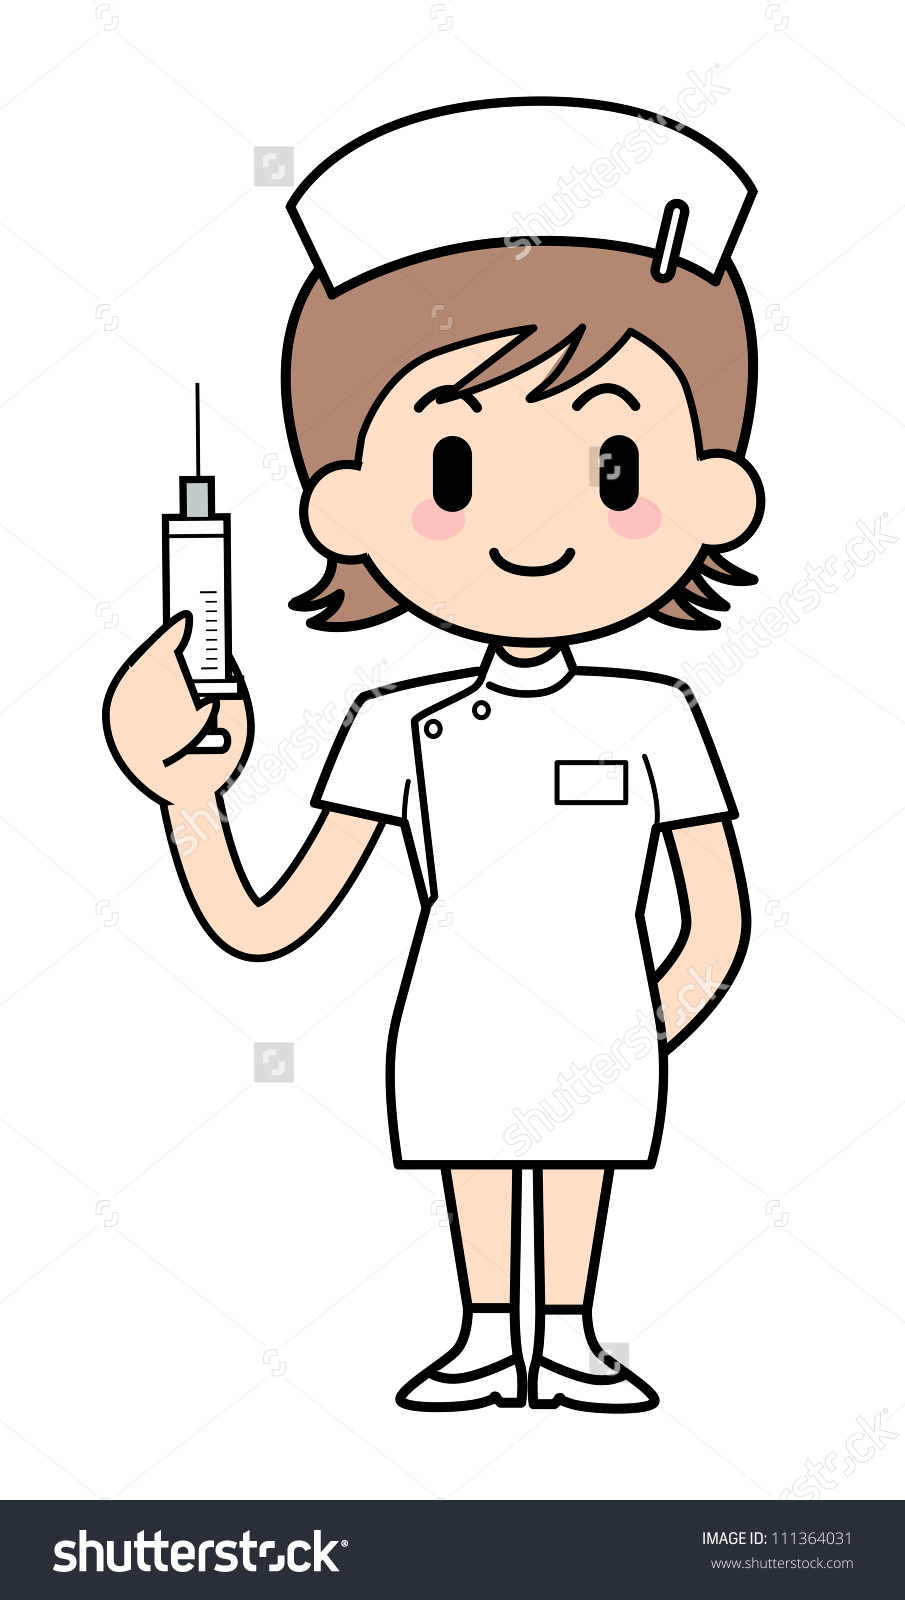 nurse injection clipart - Clipground